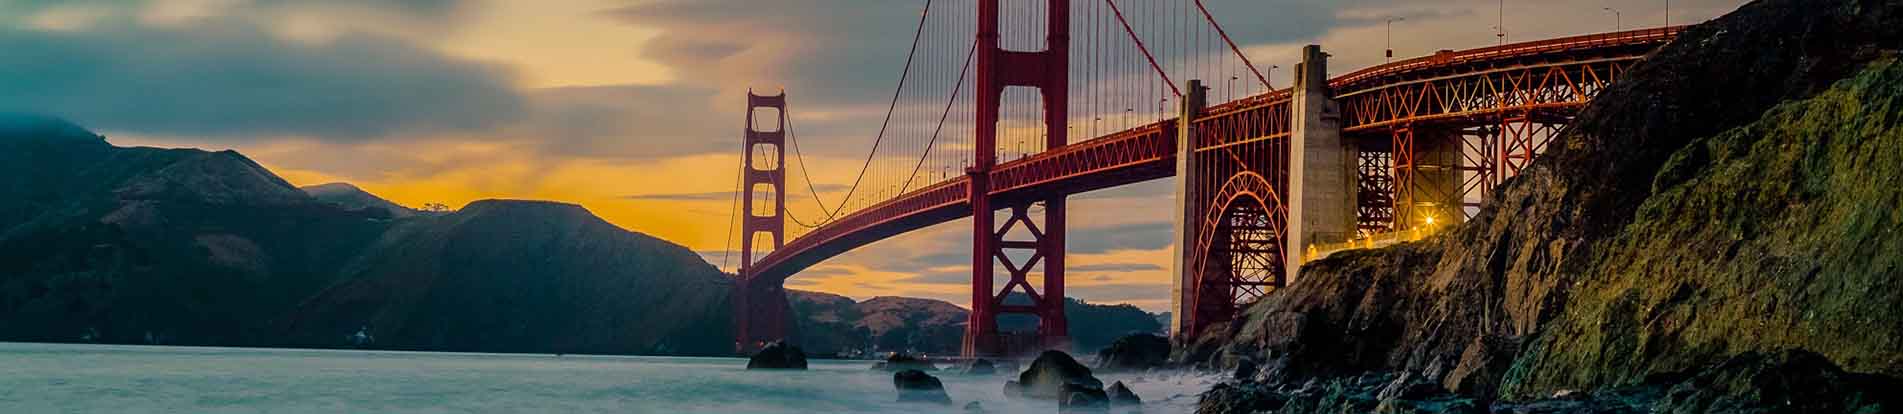 10 Things To Do in California